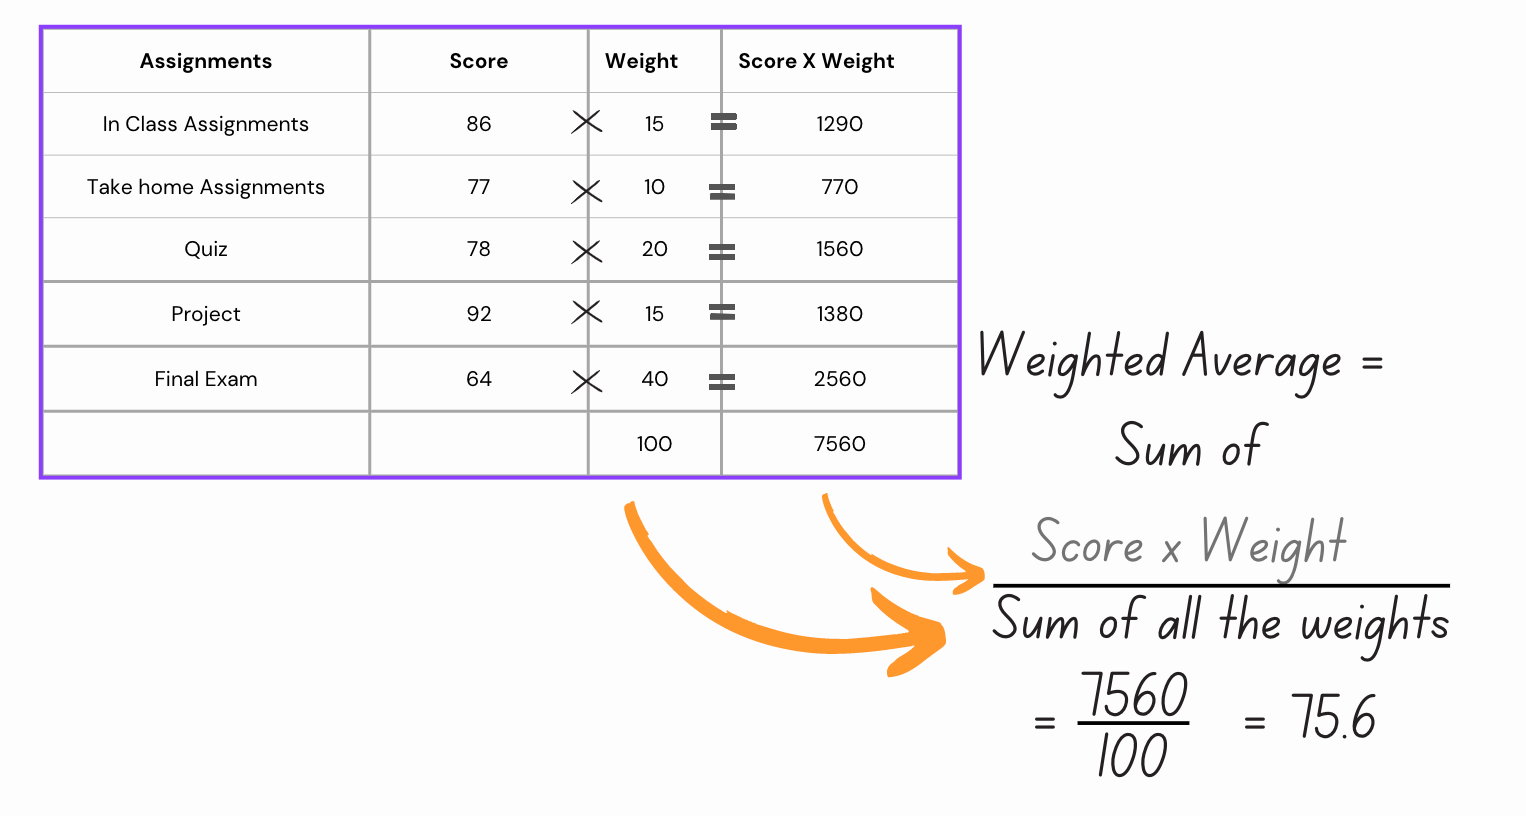 How to Calculate a Weighted Average in SAS?